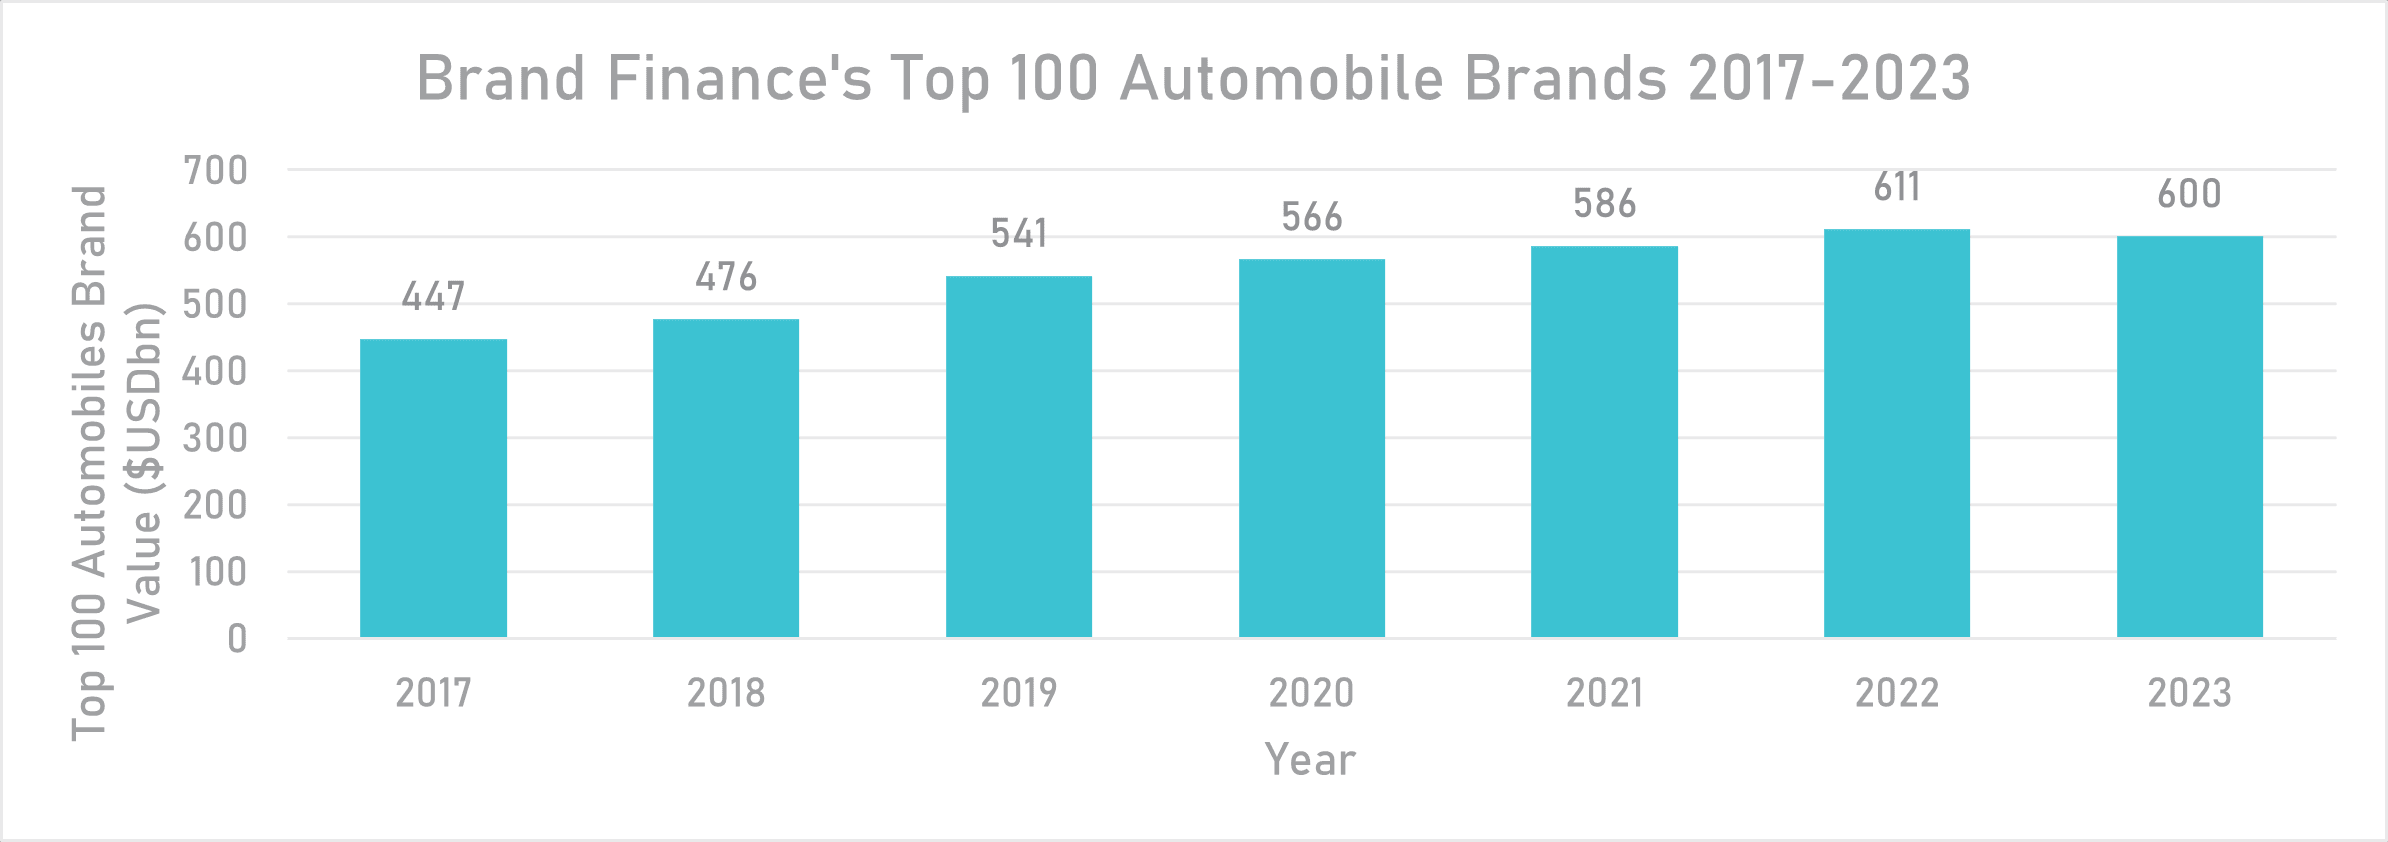 2023 Automotive Industry Trends An Industry Inflection Point? Brand